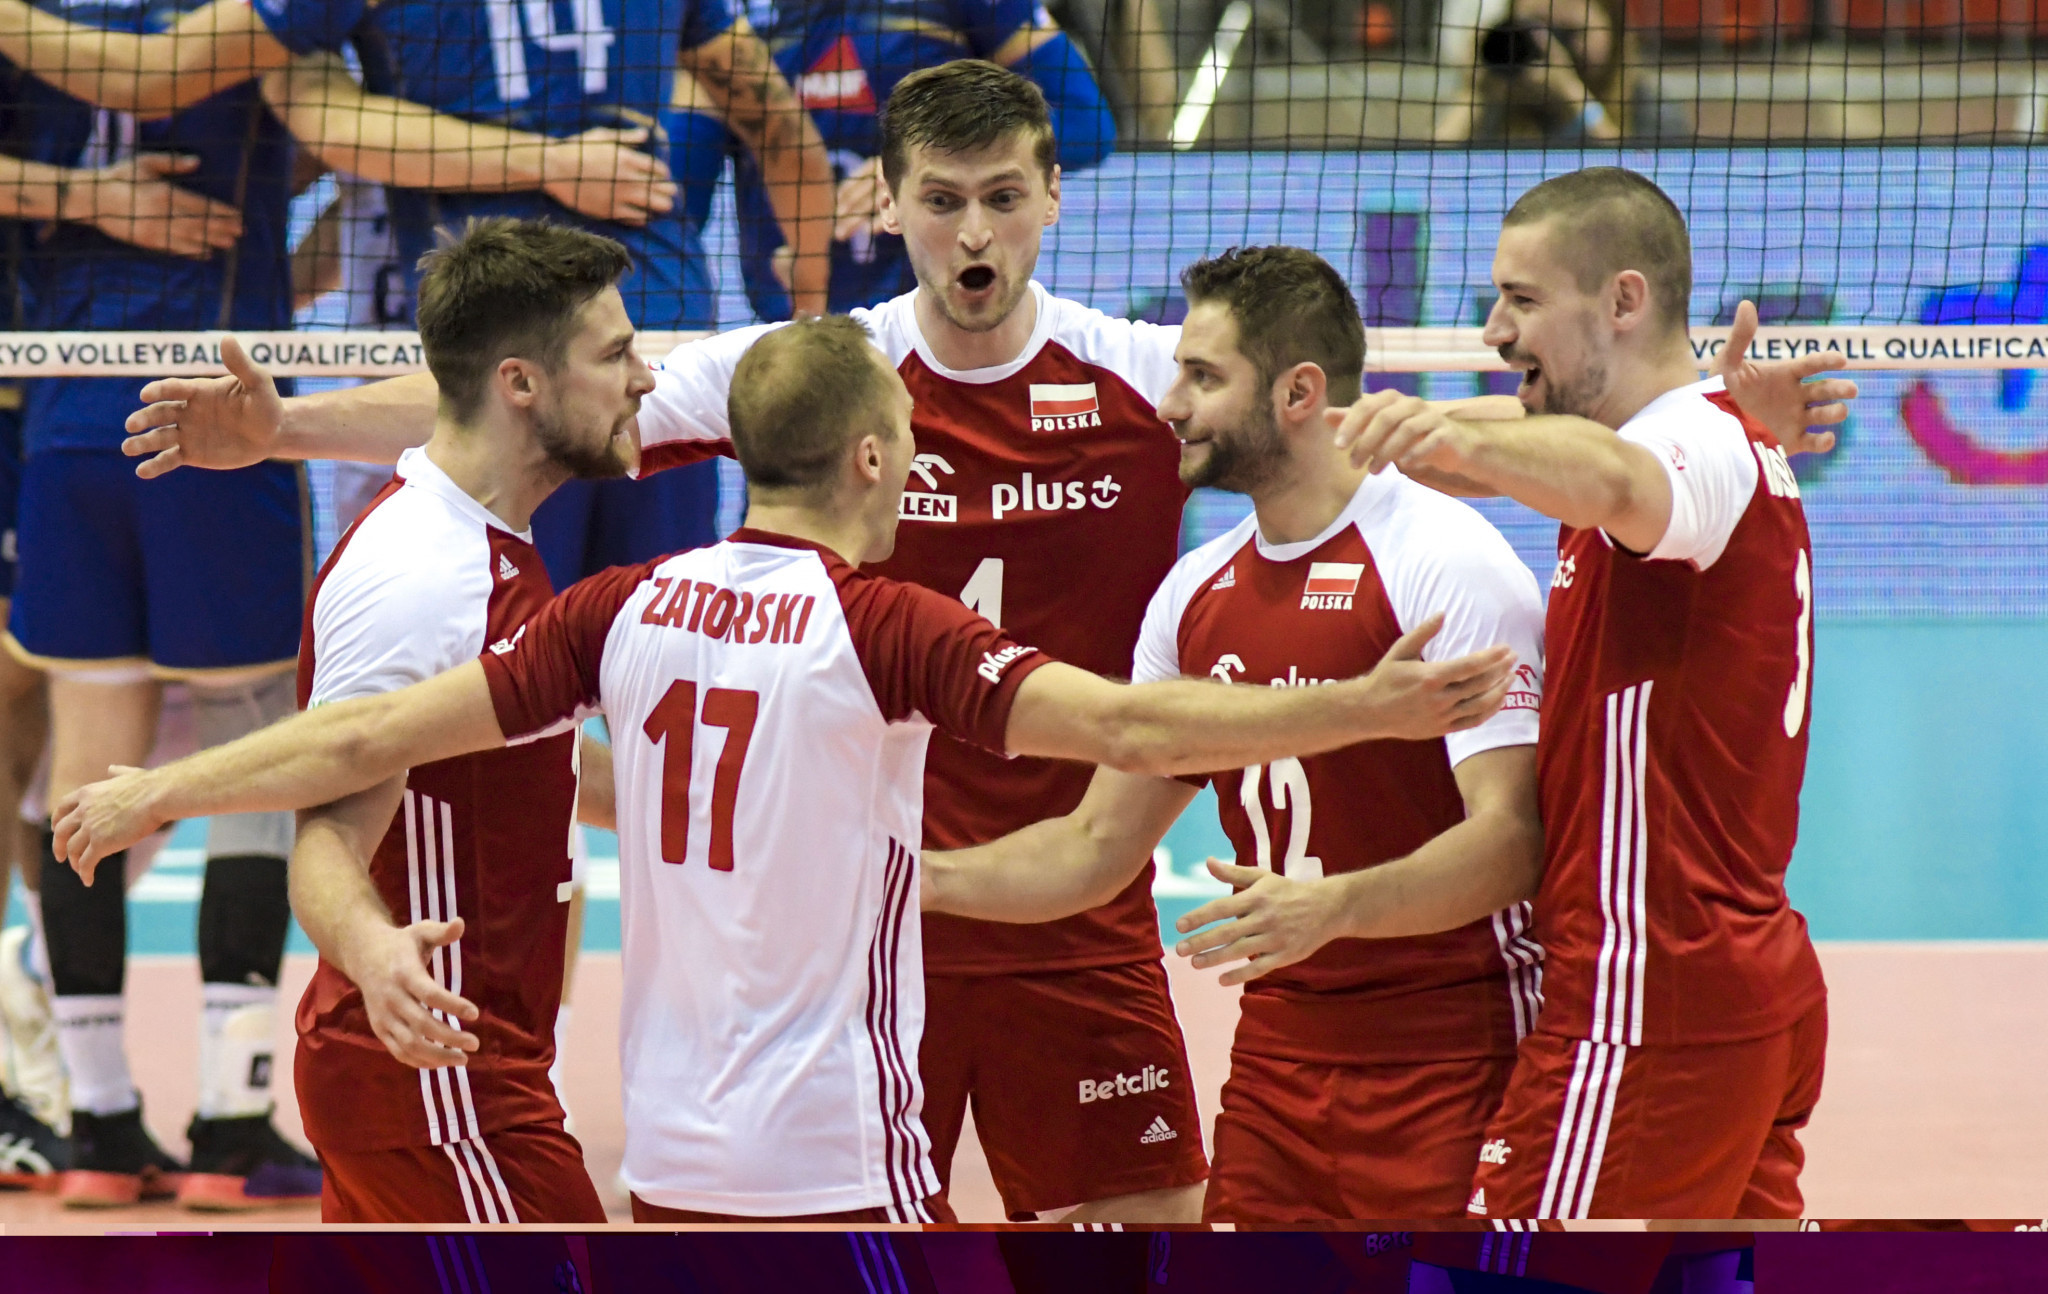 Poland defeated France 25-21, 25-19, 25-20 for a second successive victory in Gdańsk ©FIVB